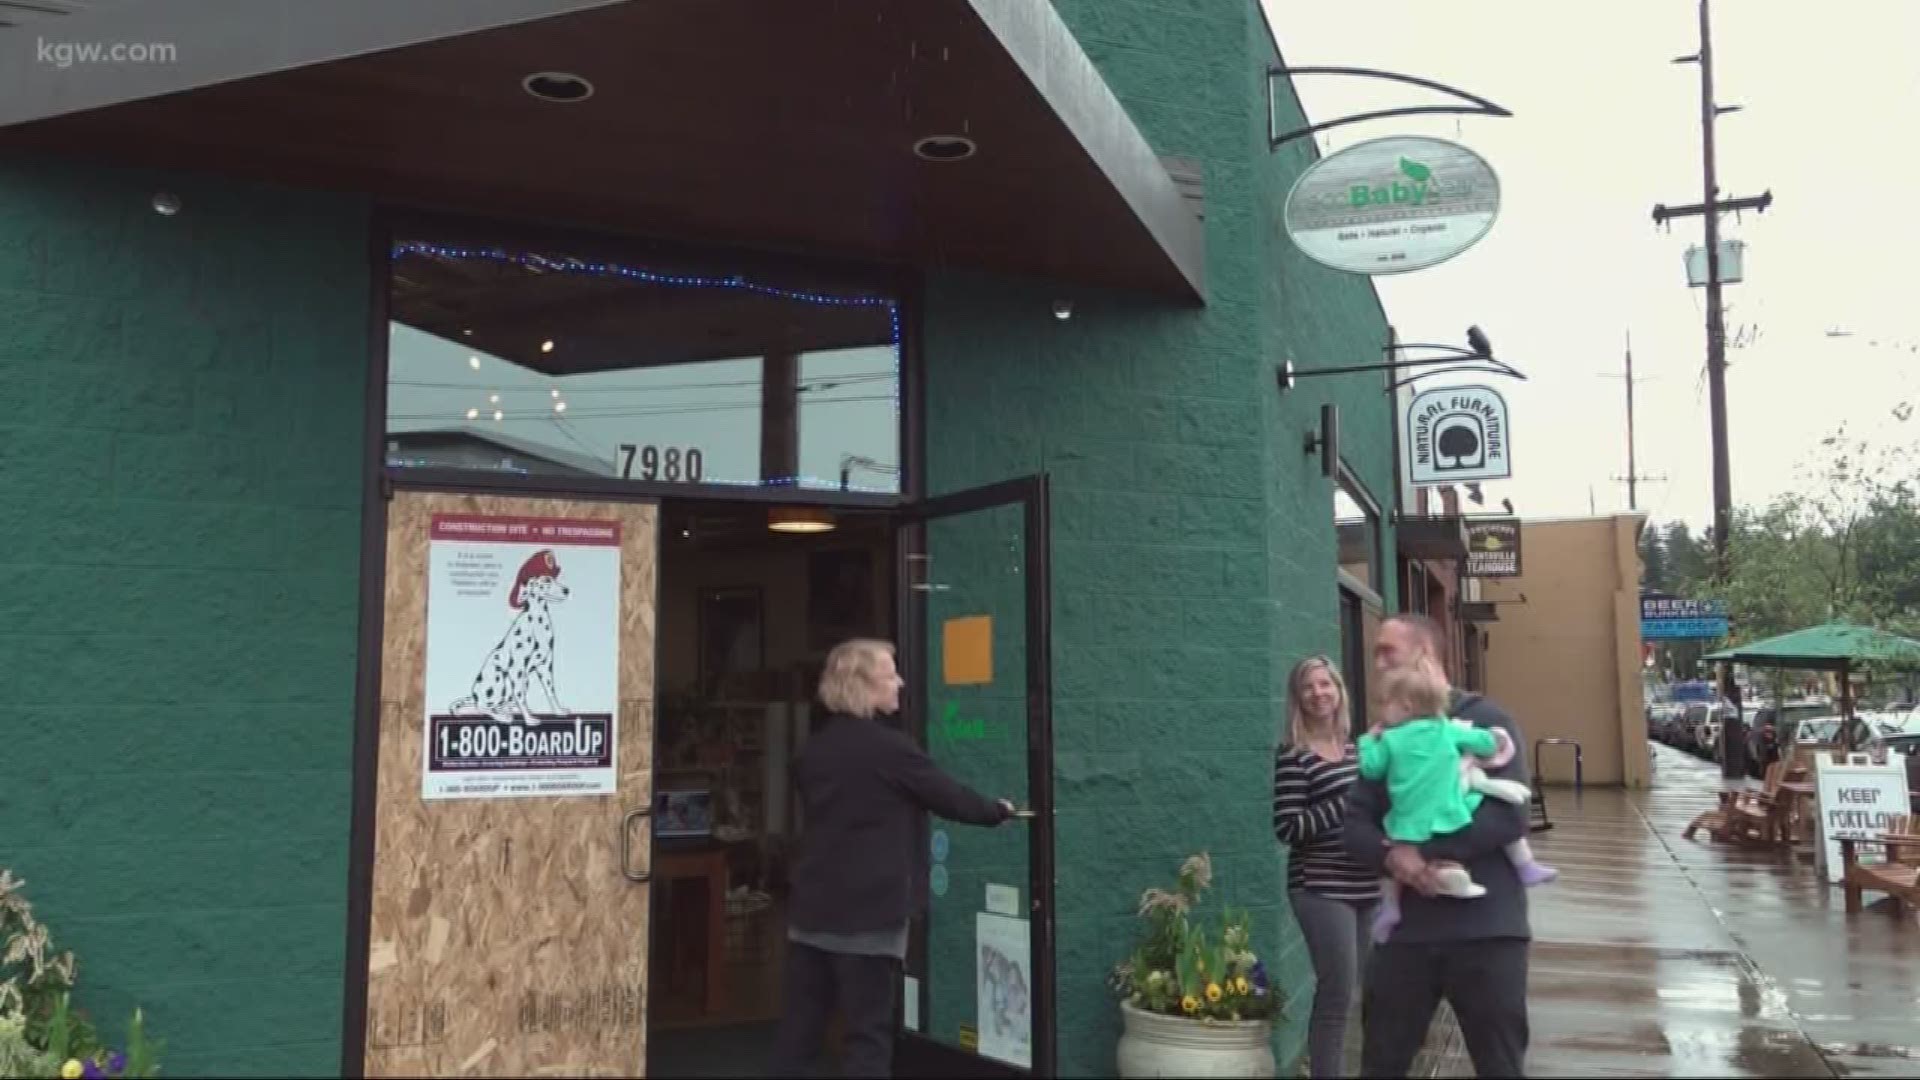 A SE Portland store is recovering from its second break-in in just two weeks. EcoBaby Gear was hit early Sunday morning and police are investigating.